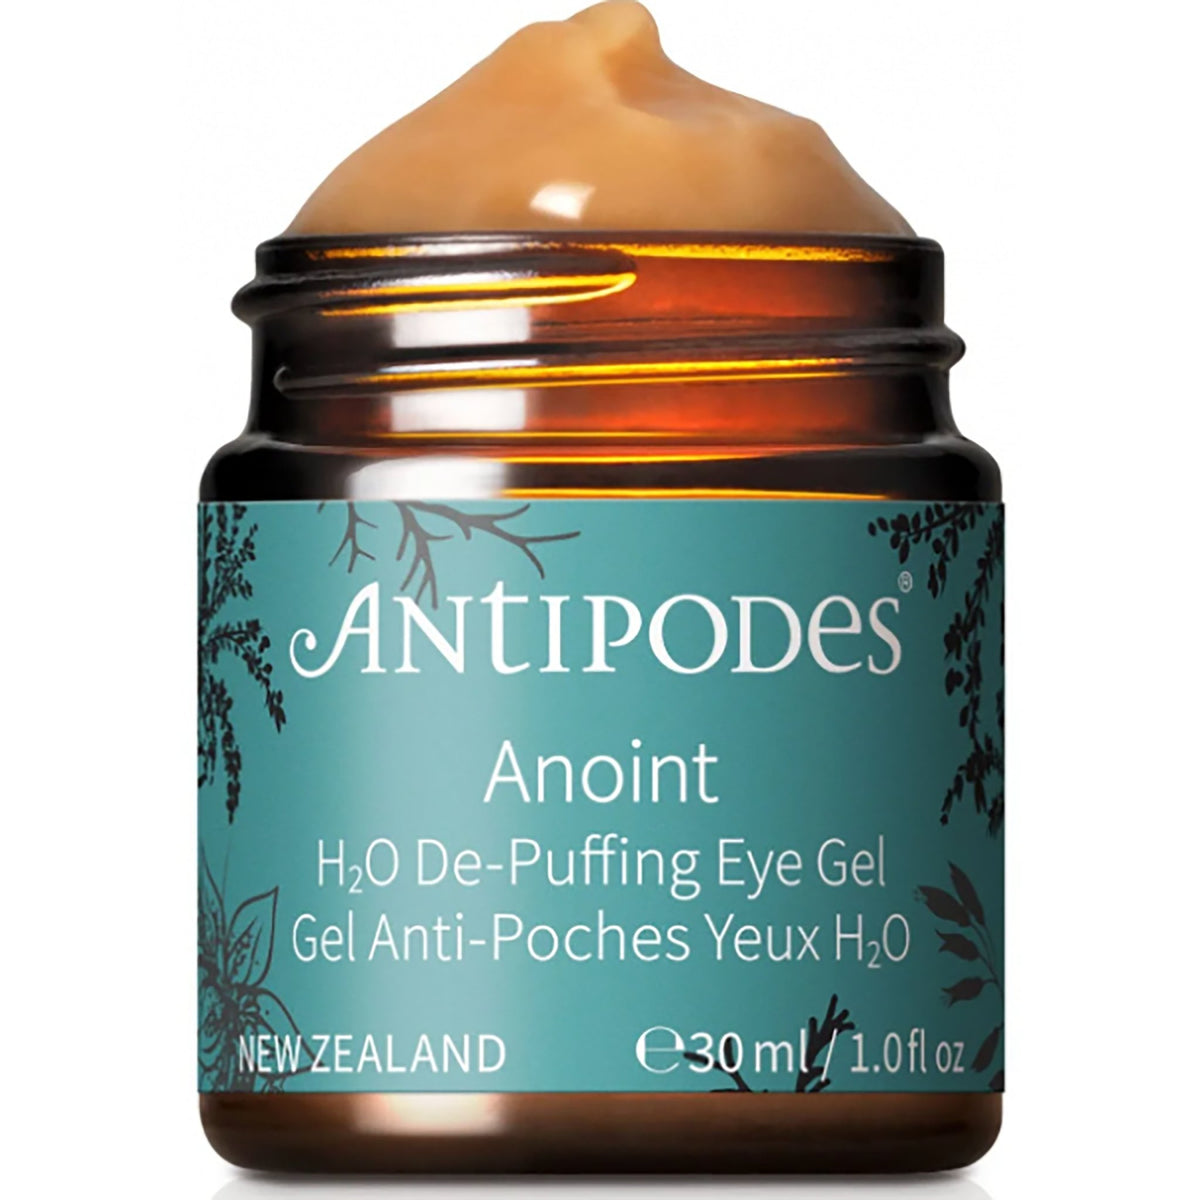 Antipodes Anoint H₂O De-Puffing Eye Gel